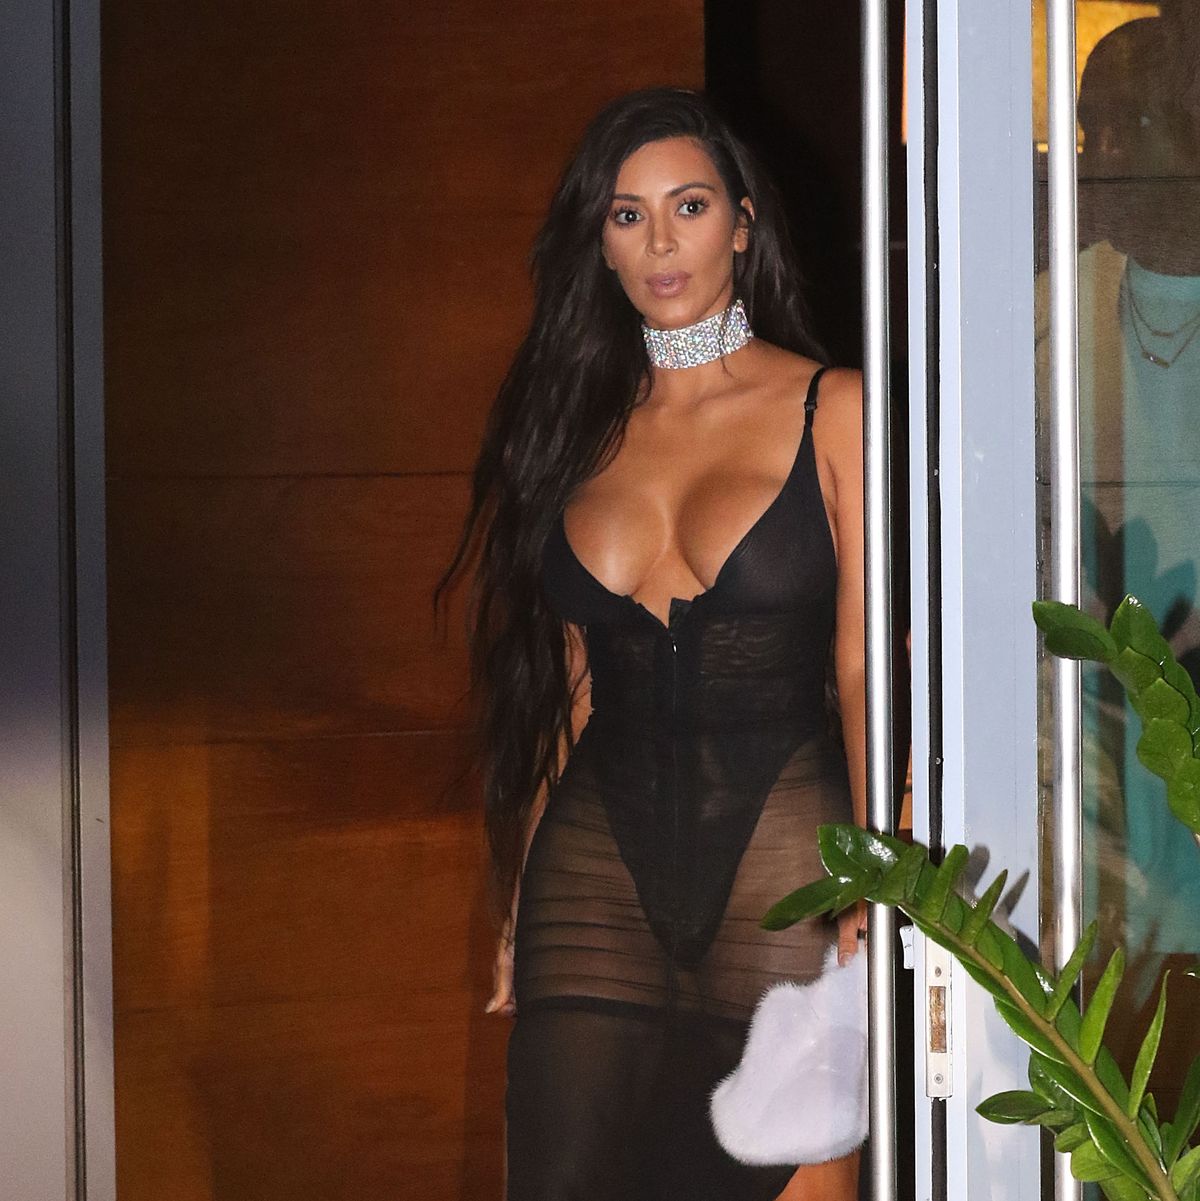 15 Times Kim Kardashian's Outfits Left Less to the Imagination